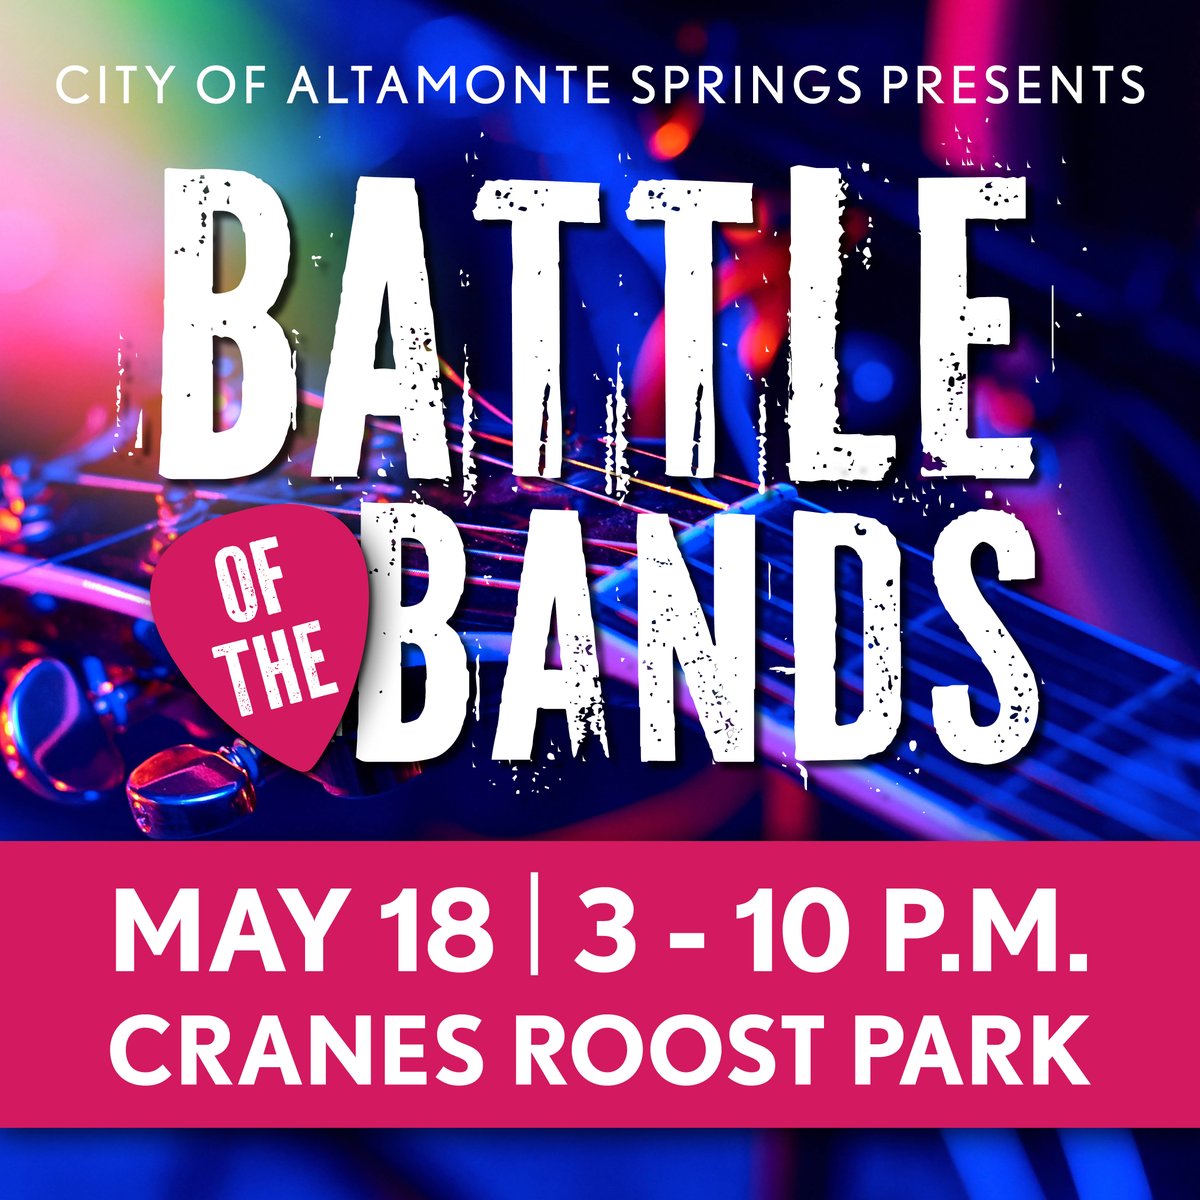 Get ready to rock out at #BattleoftheBands on May 18! All music lovers are invited to make some noise for the 12 bands competing for a spot on the #RedHotandBoom stage. Don't miss this epic showdown at #CranesRoostPark from 3 - 10 p.m.  Admission is free. ow.ly/iiNi50Rsu0E